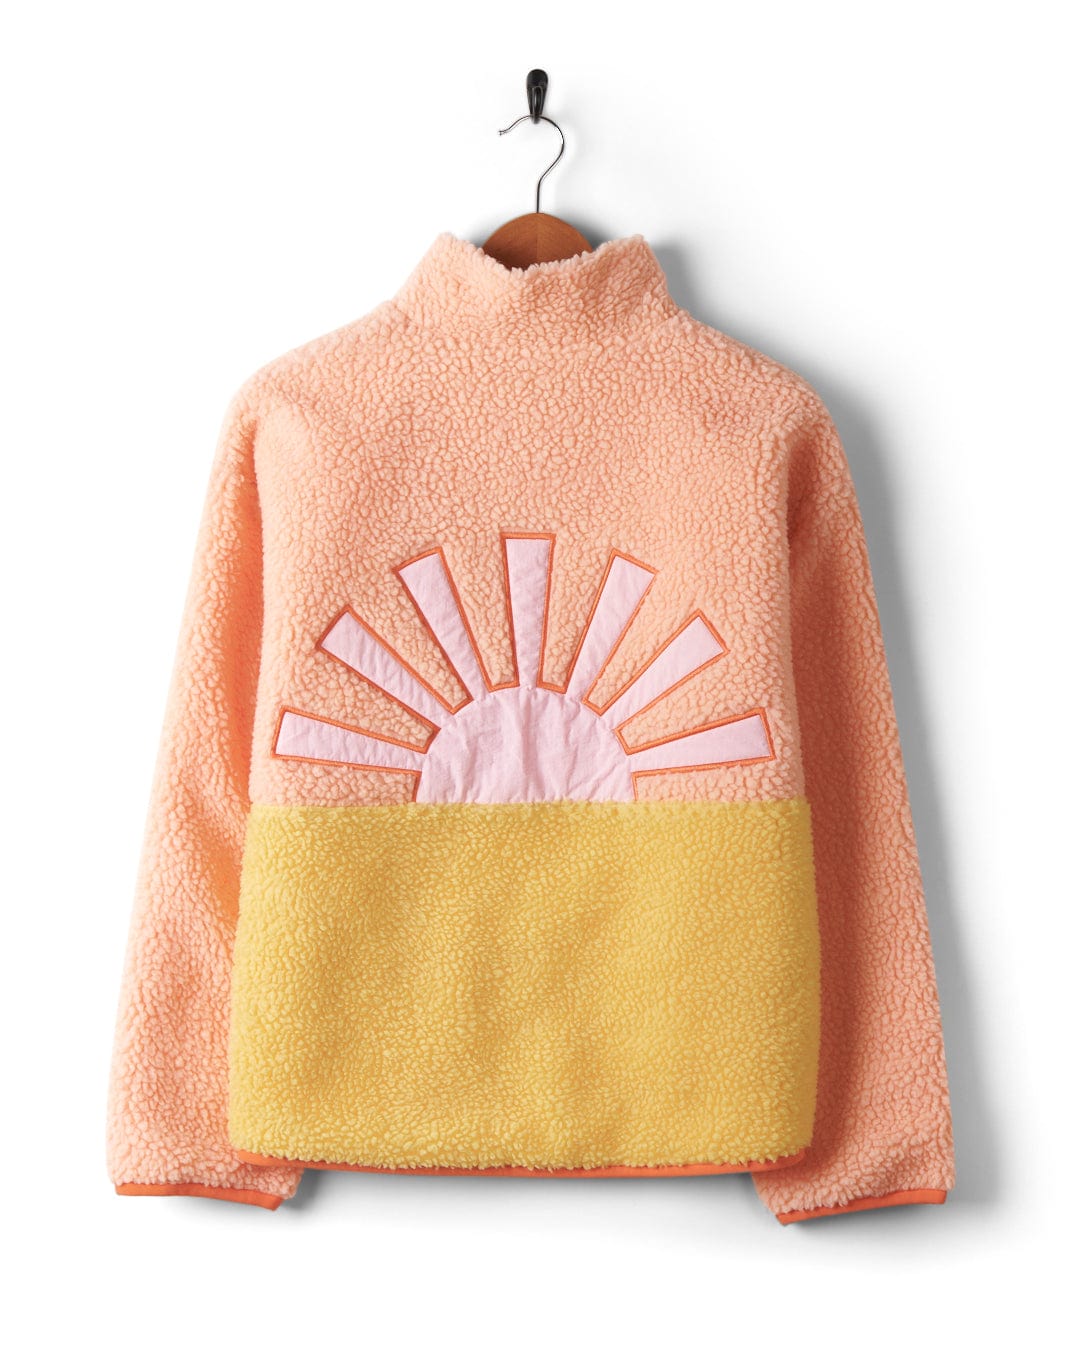 An Emery Sunshine - Womens Sherpa Fleece - Coral sweatshirt by Saltrock, featuring contrast pockets and a panel color block.